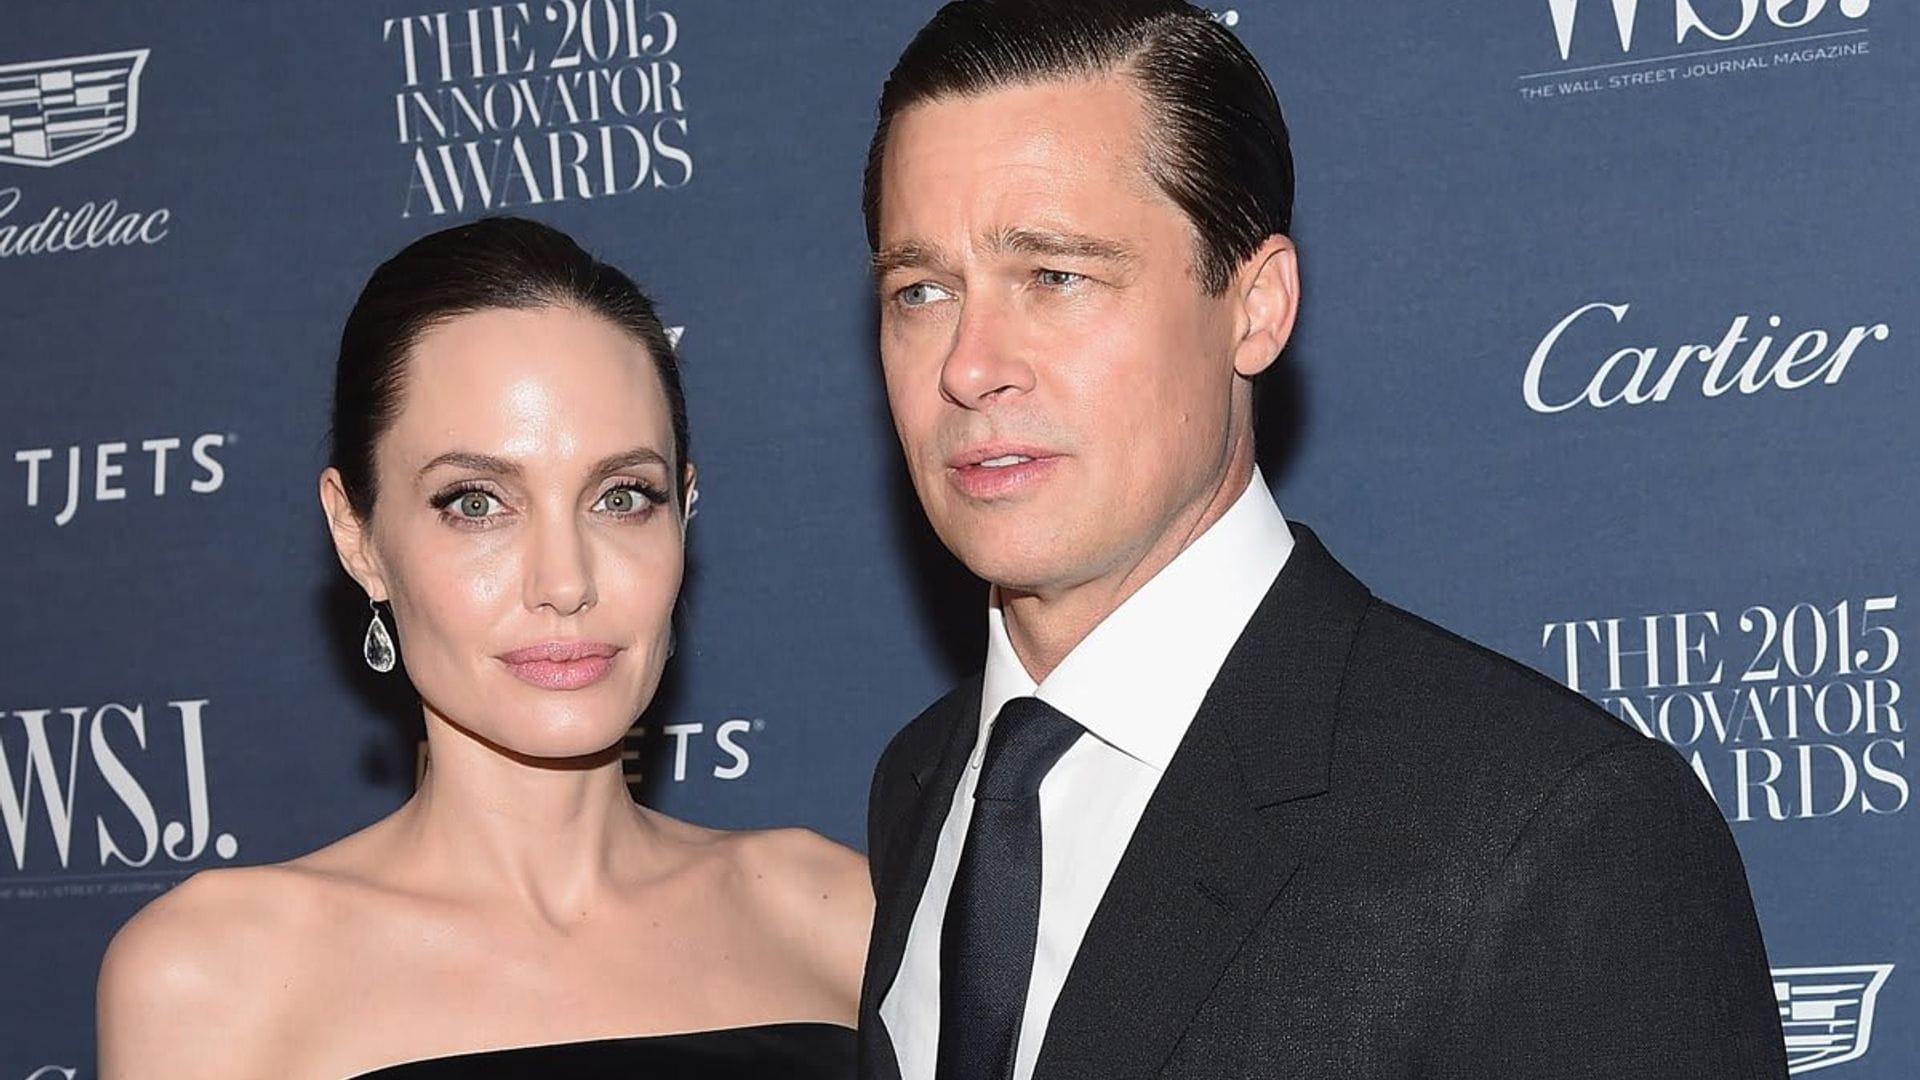 Angelina Jolie Sells Winston Churchill’s Painting She Purchased With Brad Pitt for $11 Million